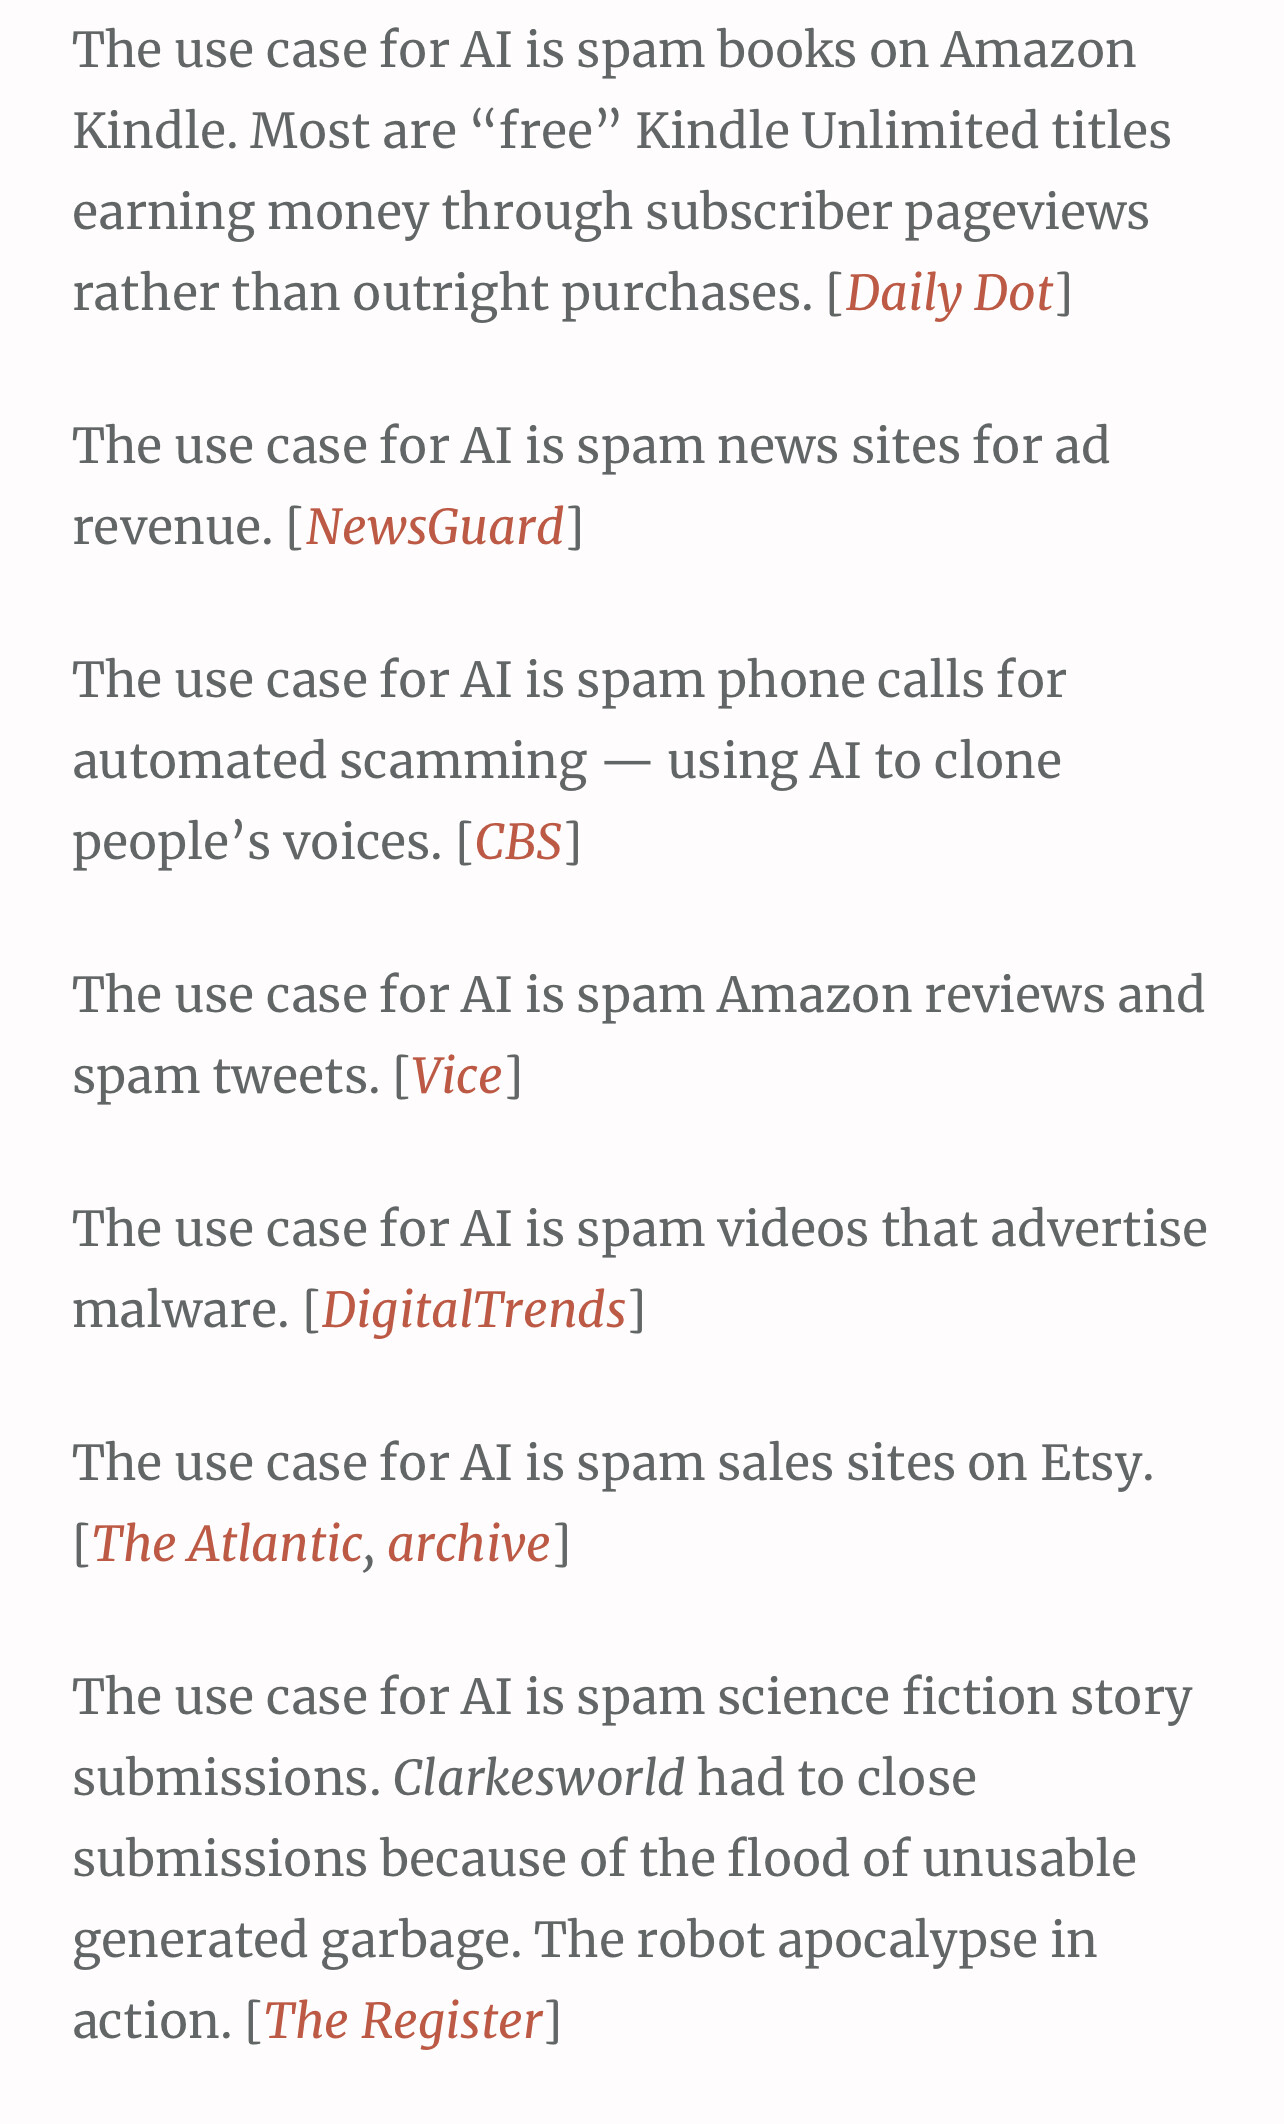 The use case for AI is to: spam books, spam news sites, spam phone calls, spam Amazon reviews, spam malware videos, spam sales sites like Etsy, spam ... 